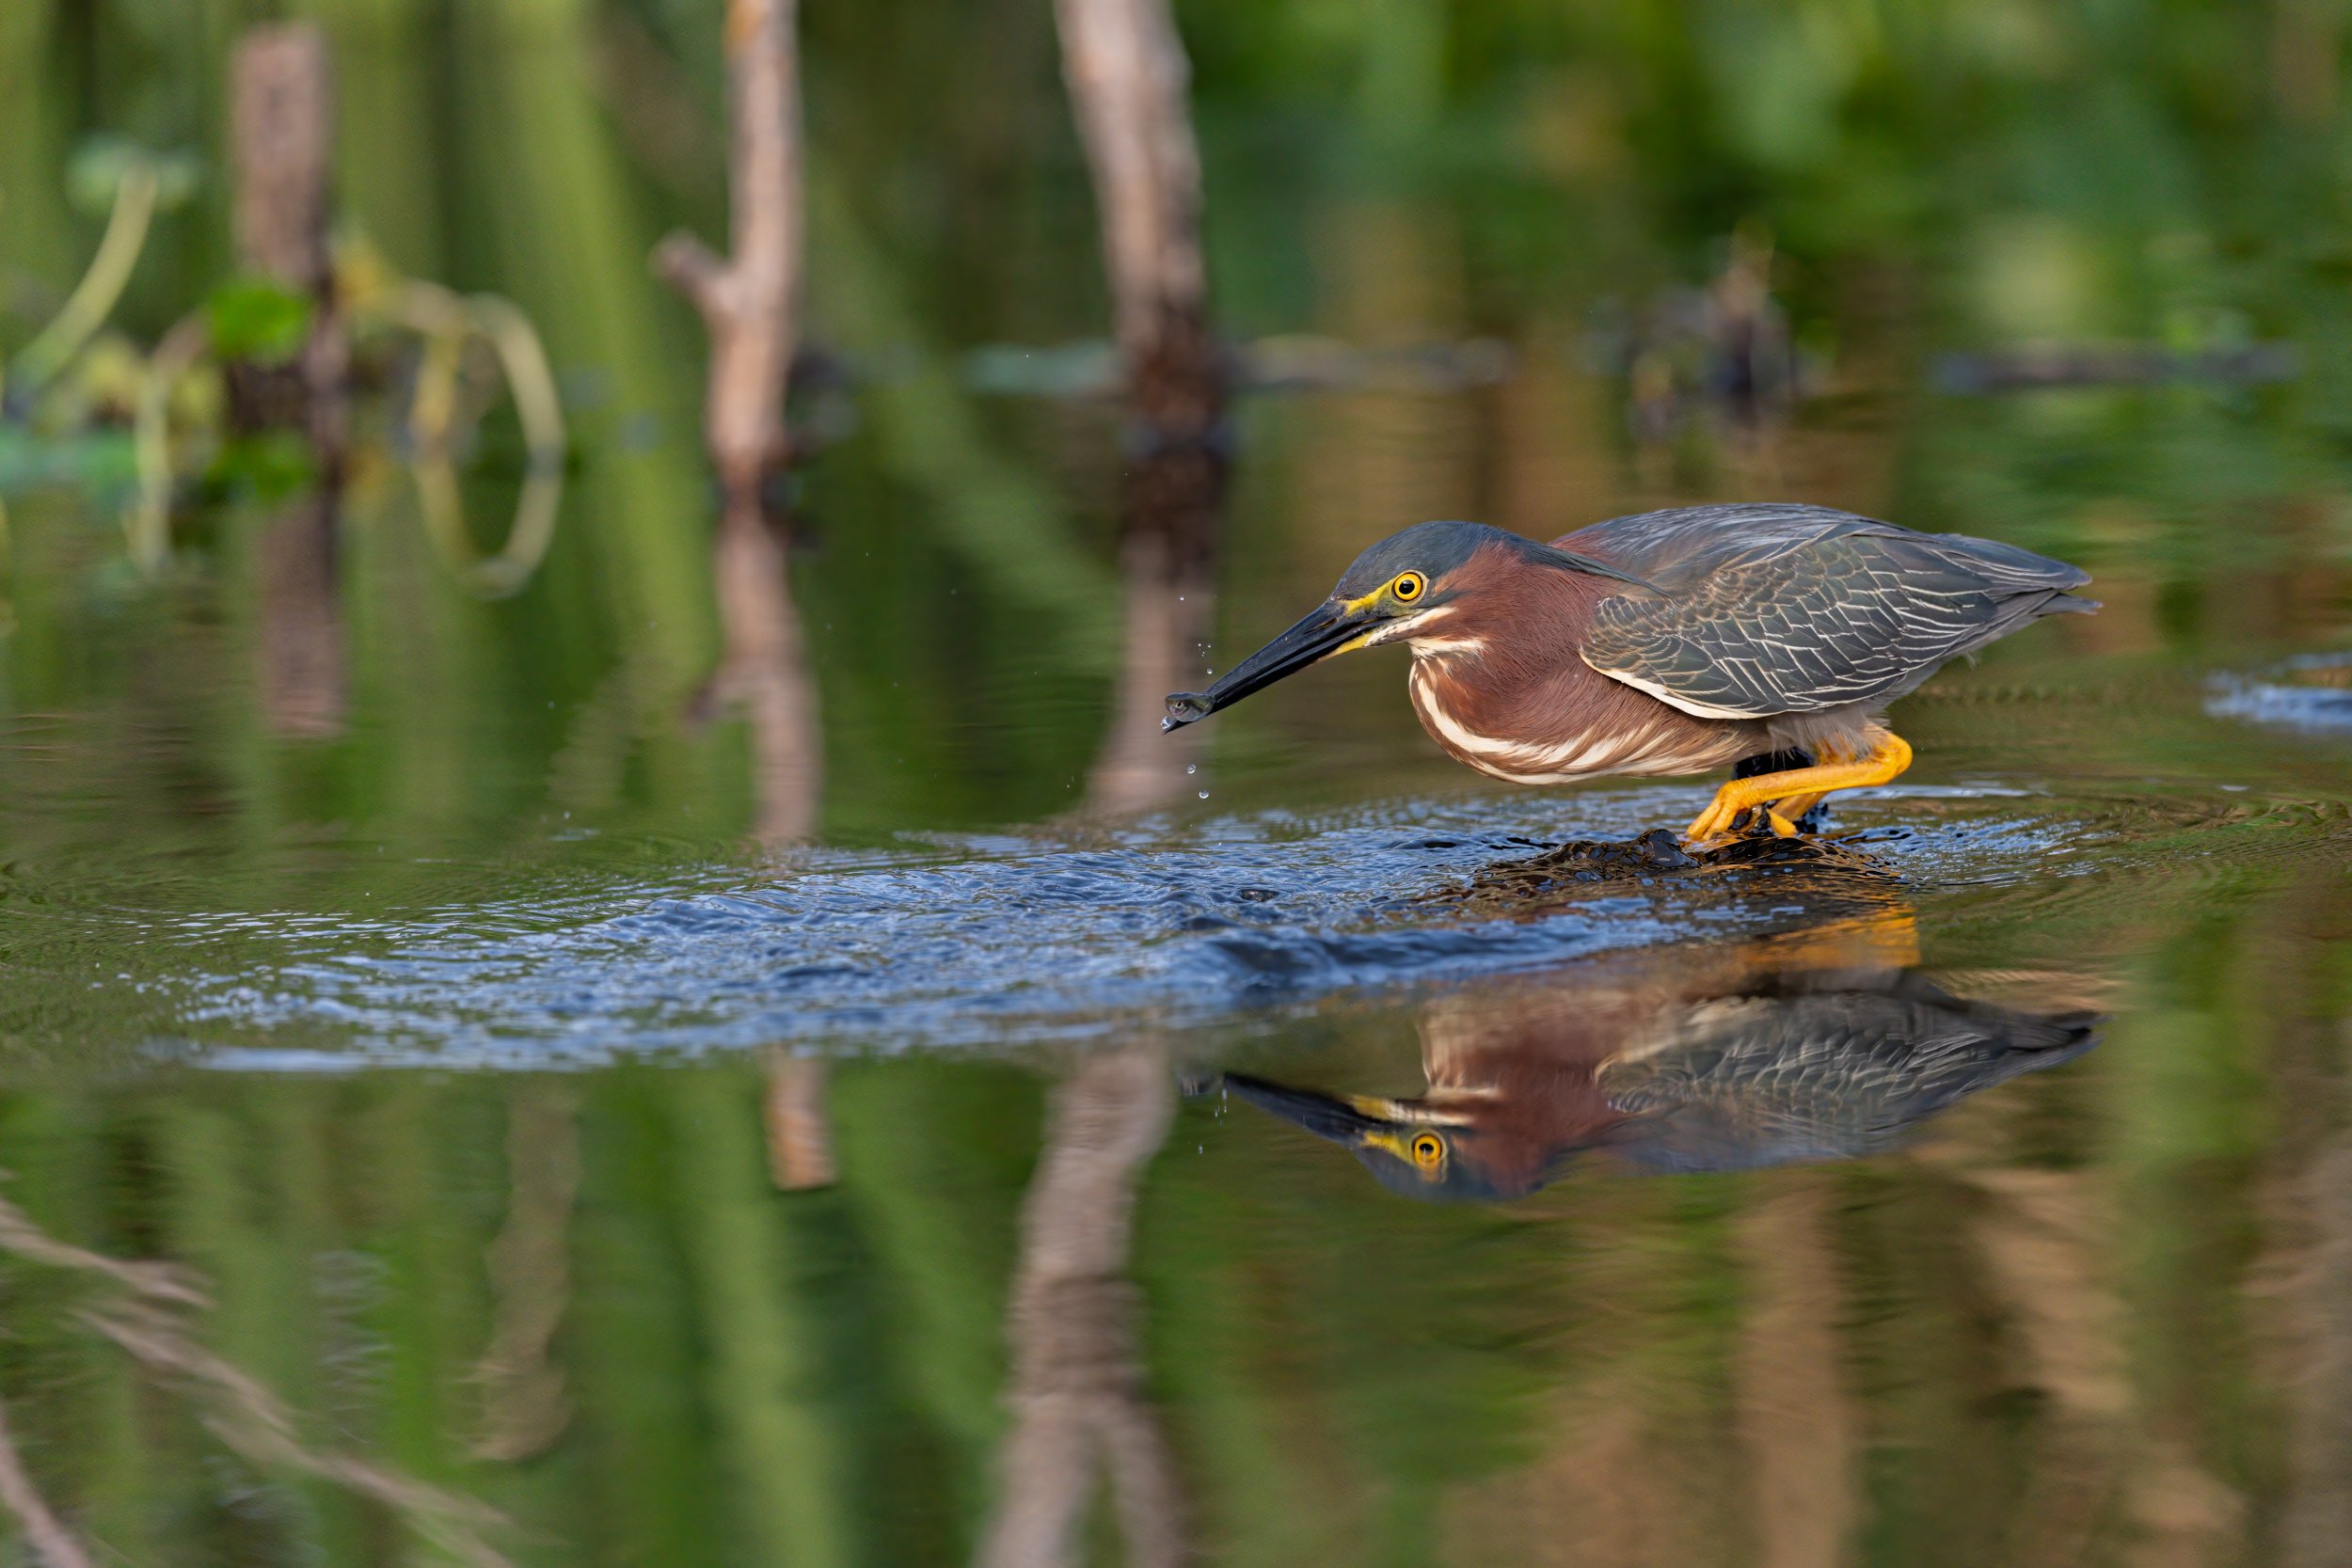  Green BAcked Heron in the swamps of Louisiana, with a fish in its beak. 